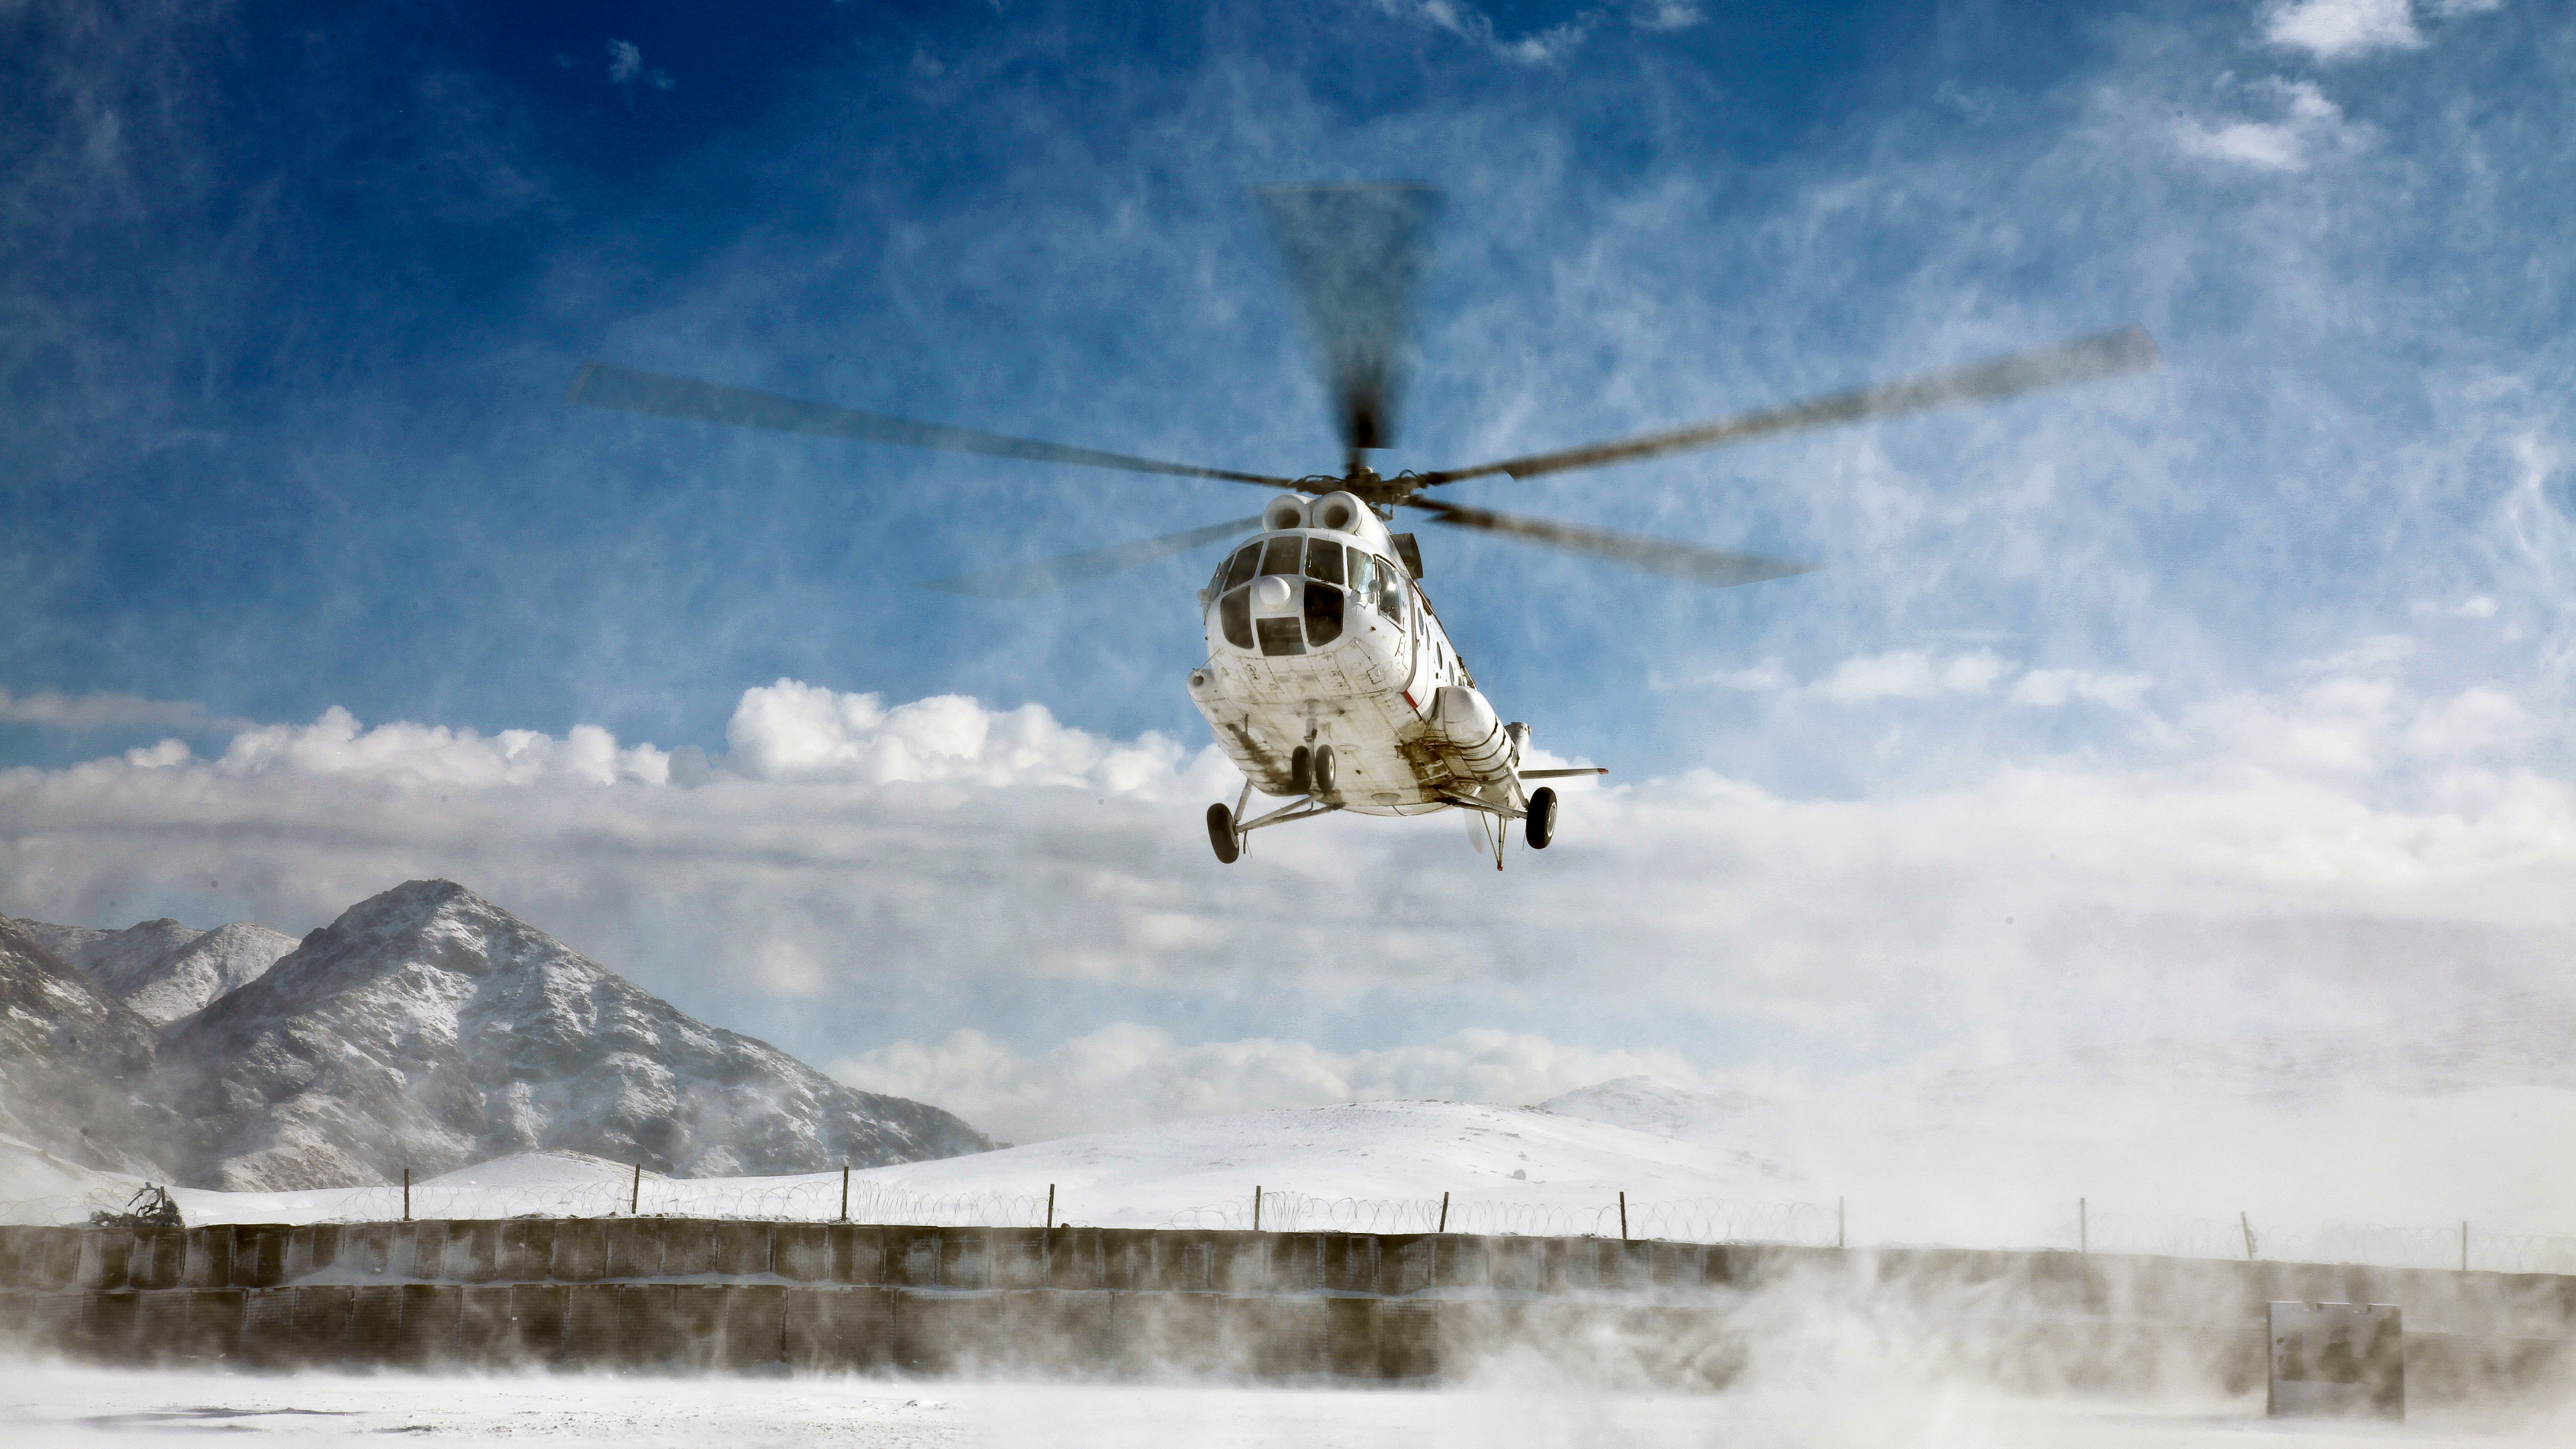 White and Black Helicopter Flying Over Snow Covered Mountain During Daytime. Wallpaper in 3840x2160 Resolution